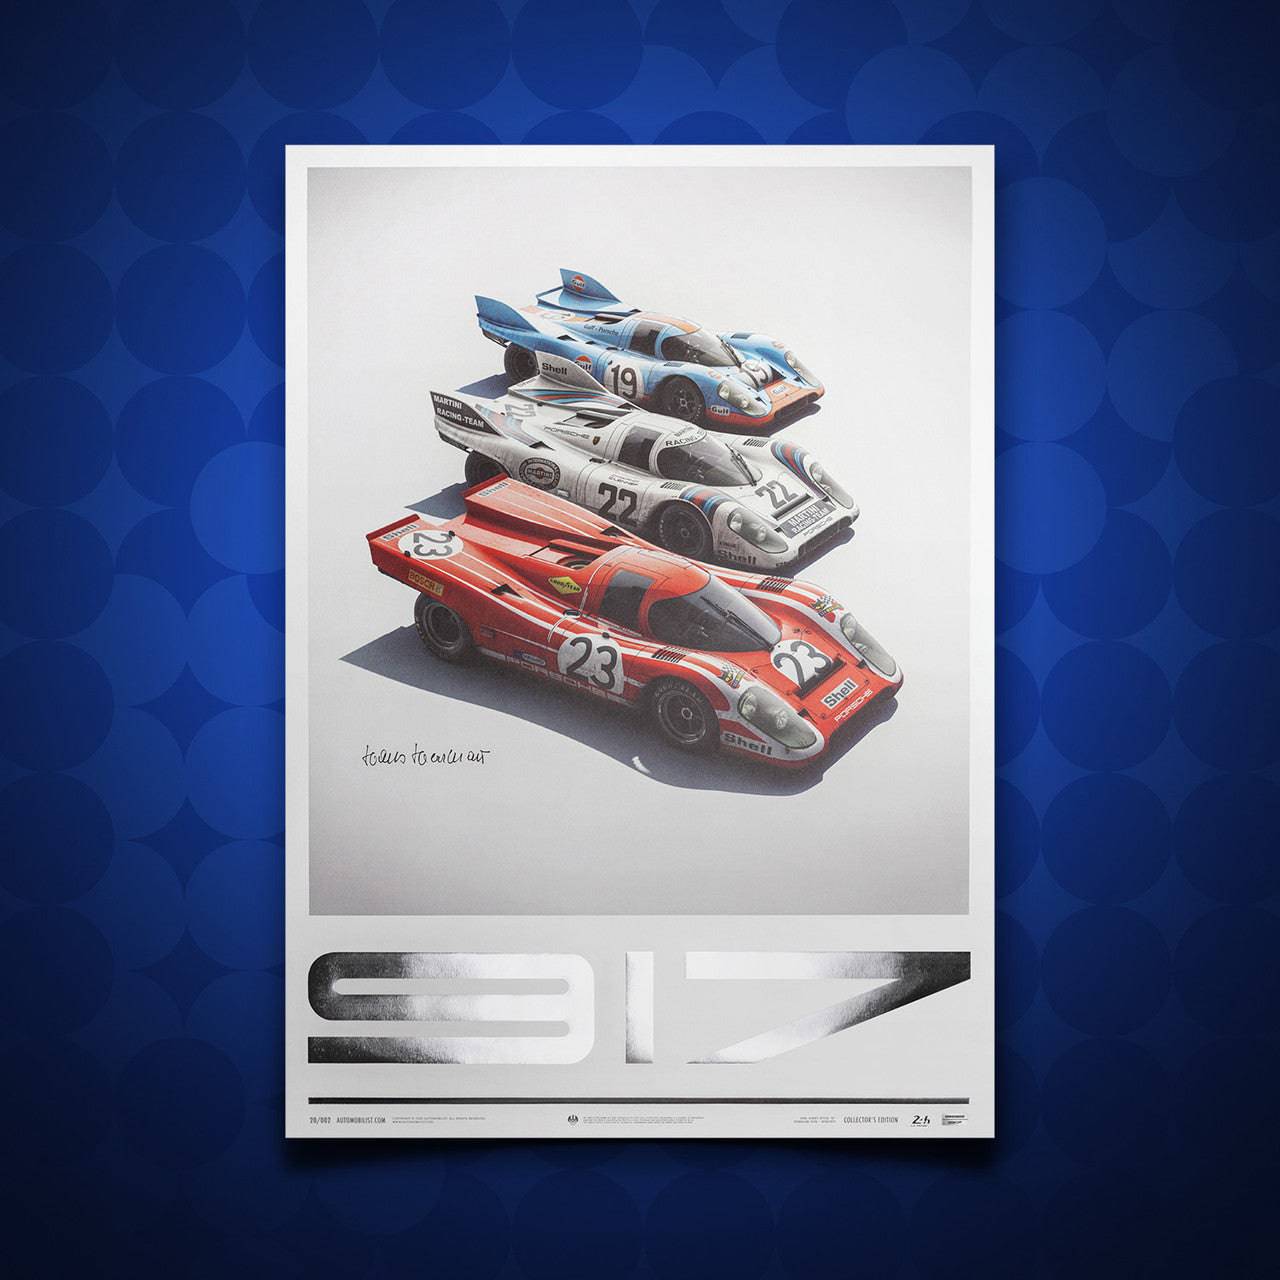 Limited Edition Car: Over 917 Royalty-Free Licensable Stock